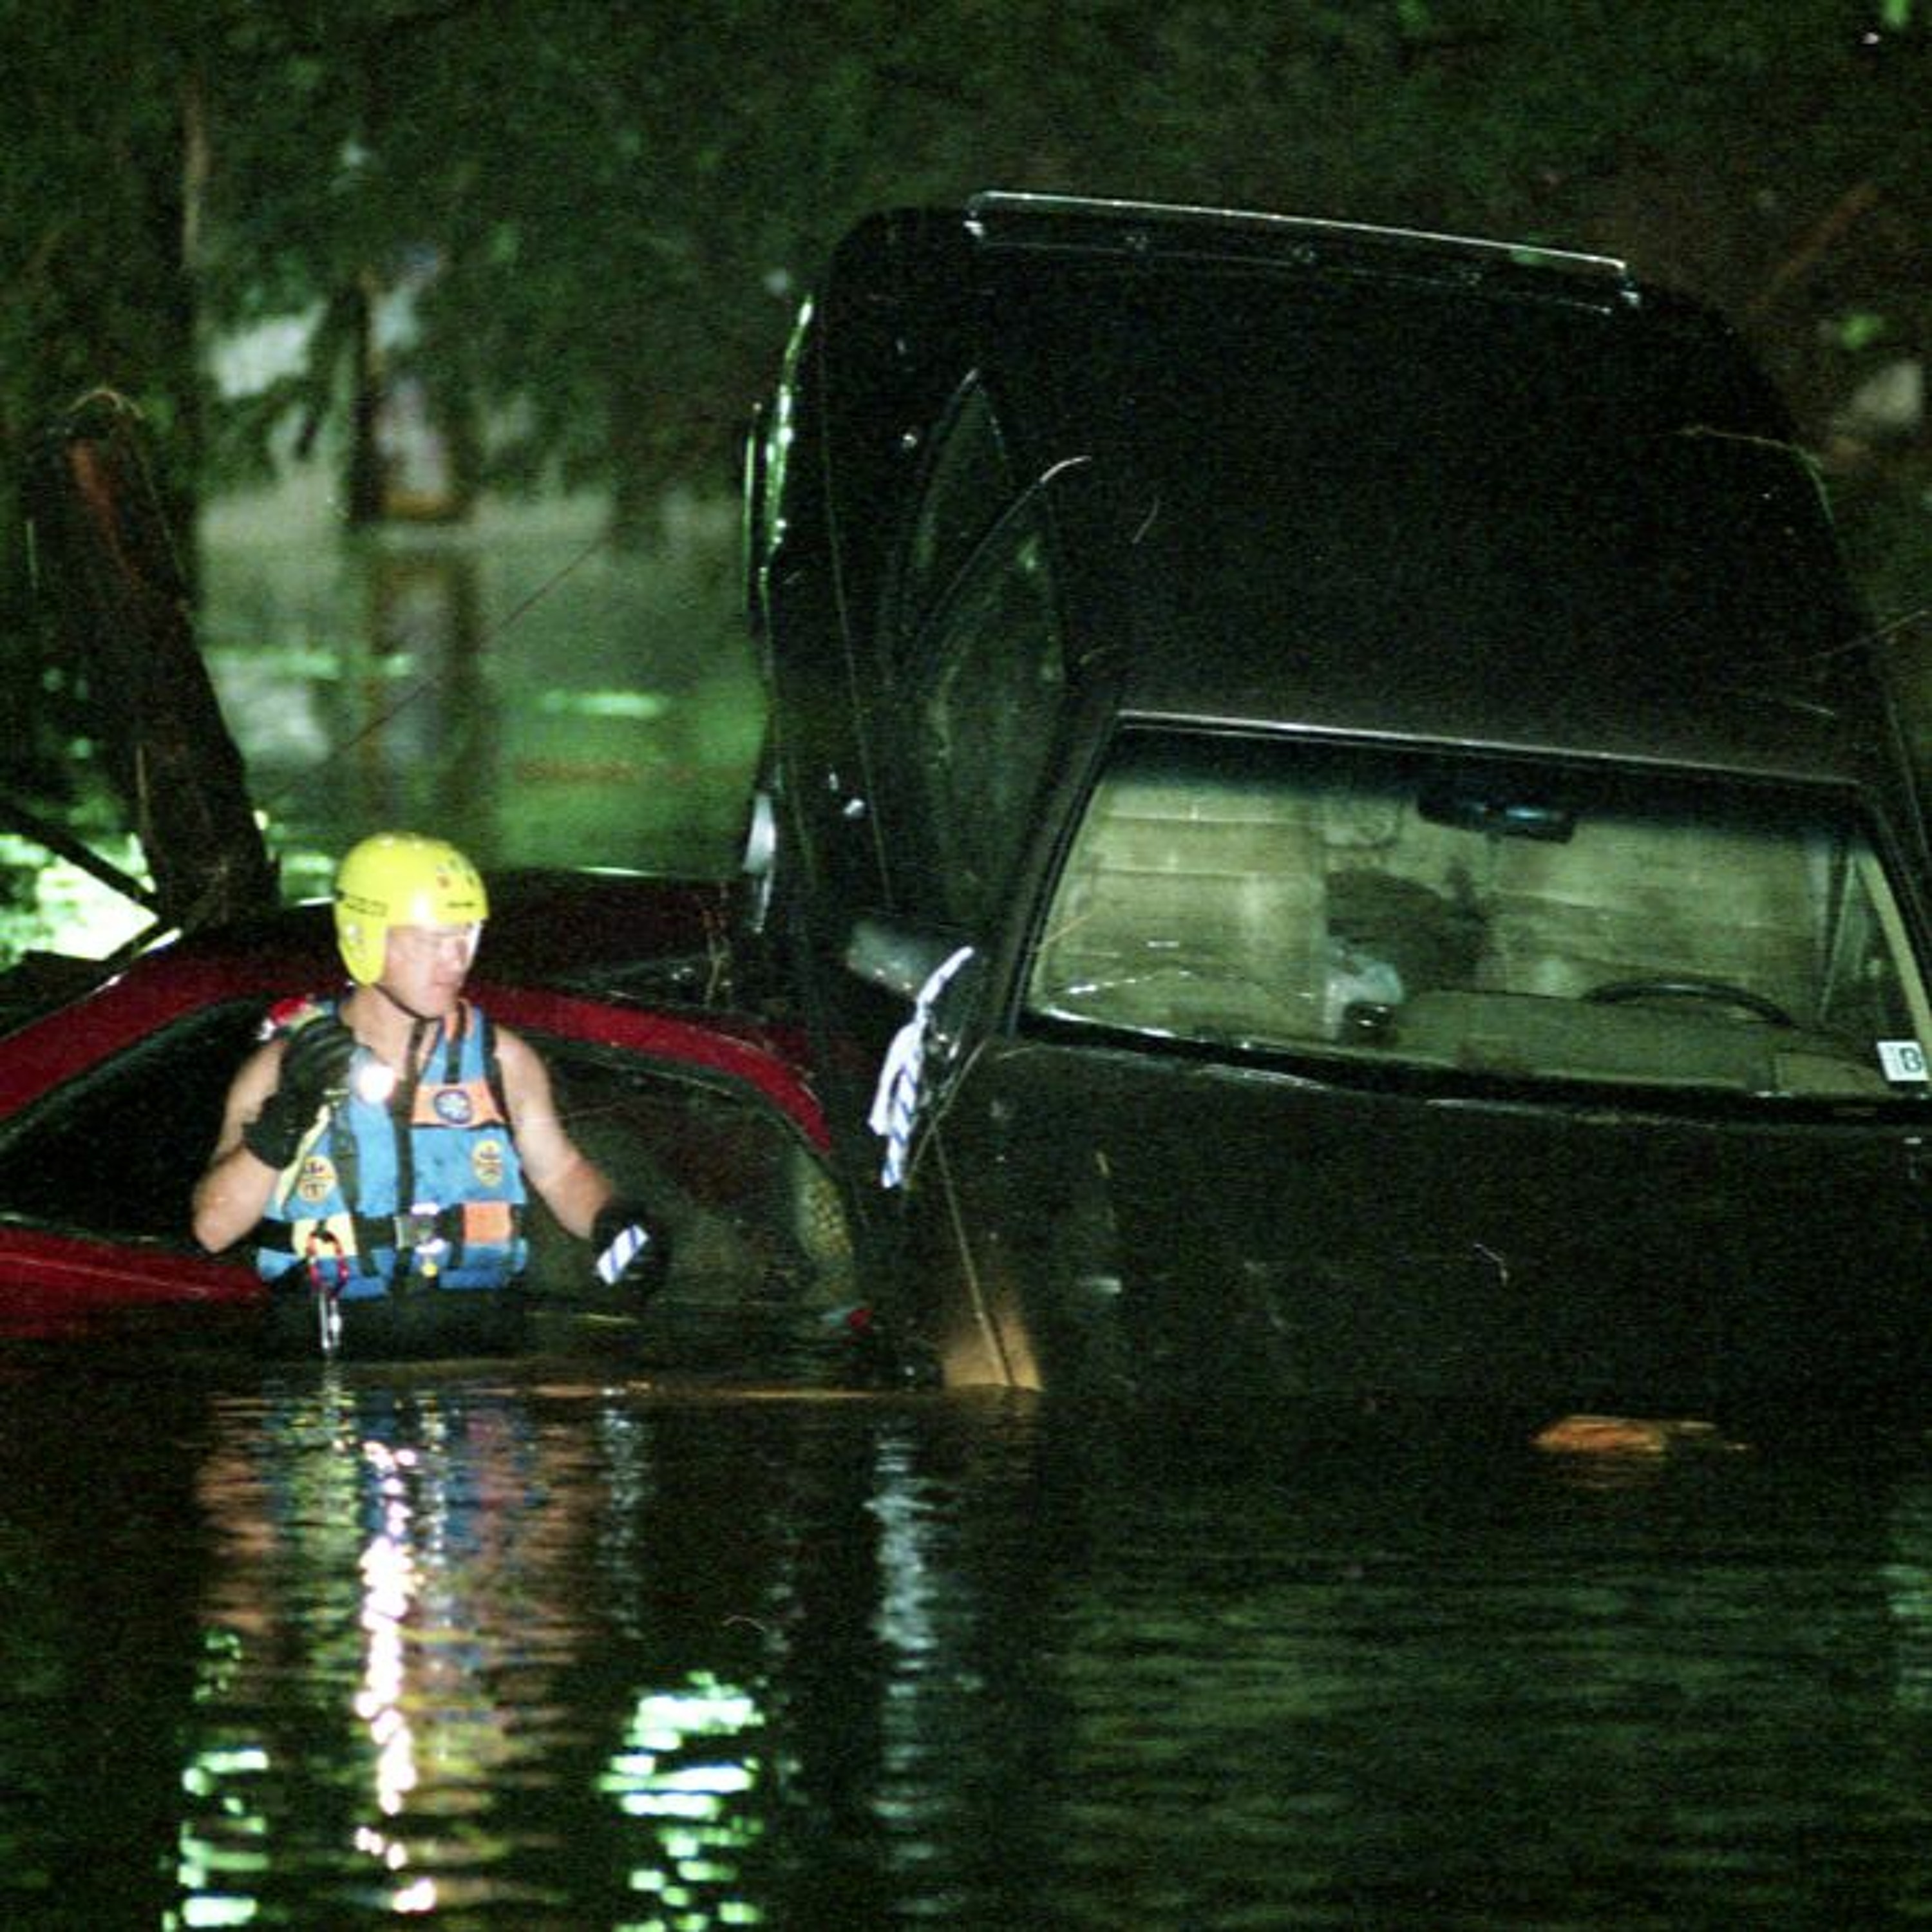 Hell and high water: The Spring Creek Flood of 1997